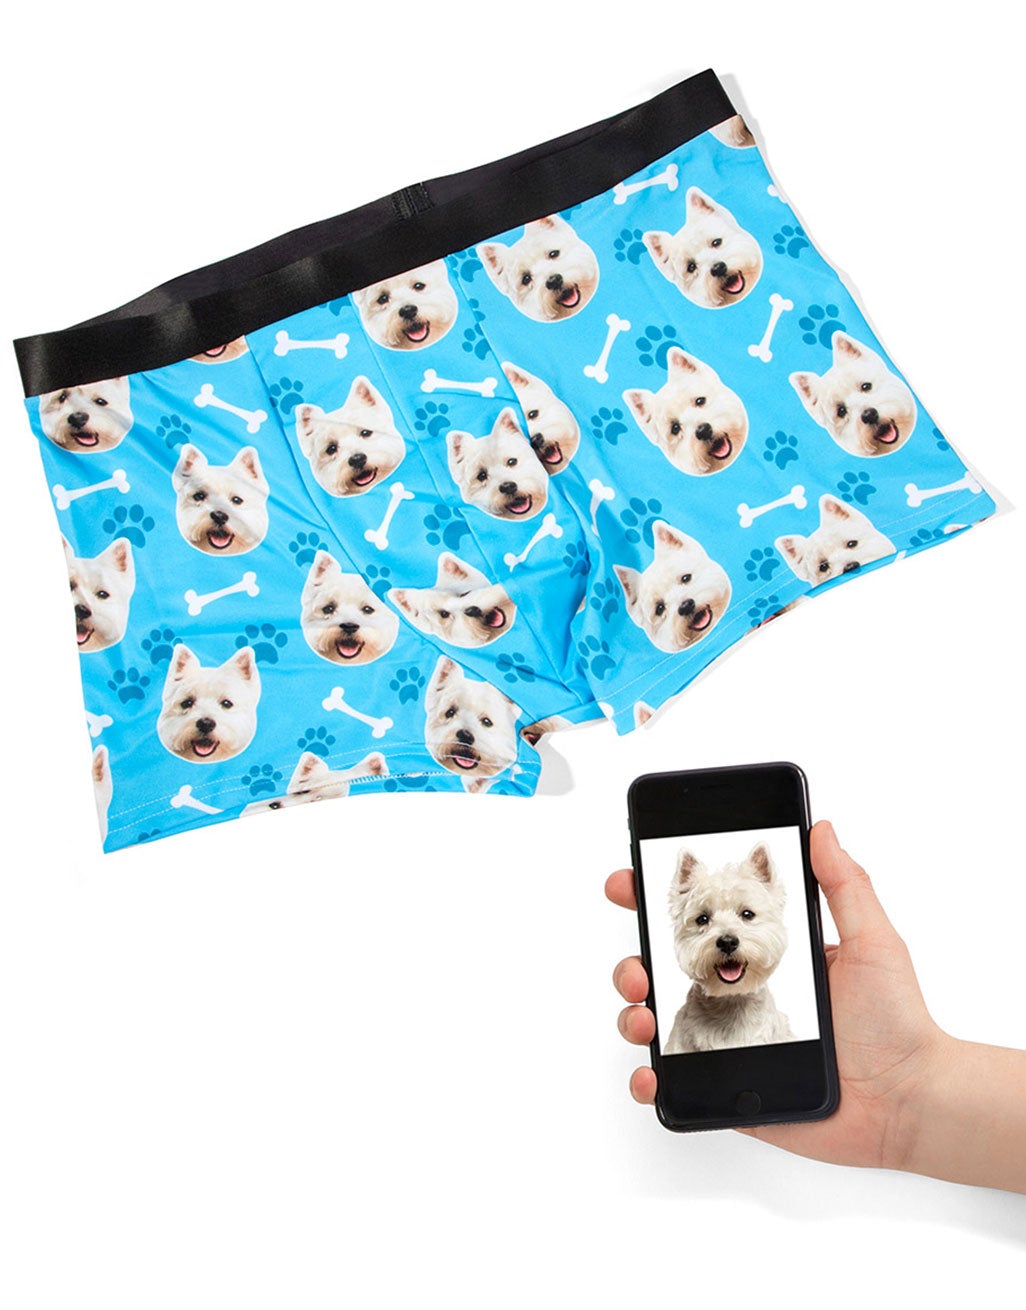 Your Dogs Photo on Boxers